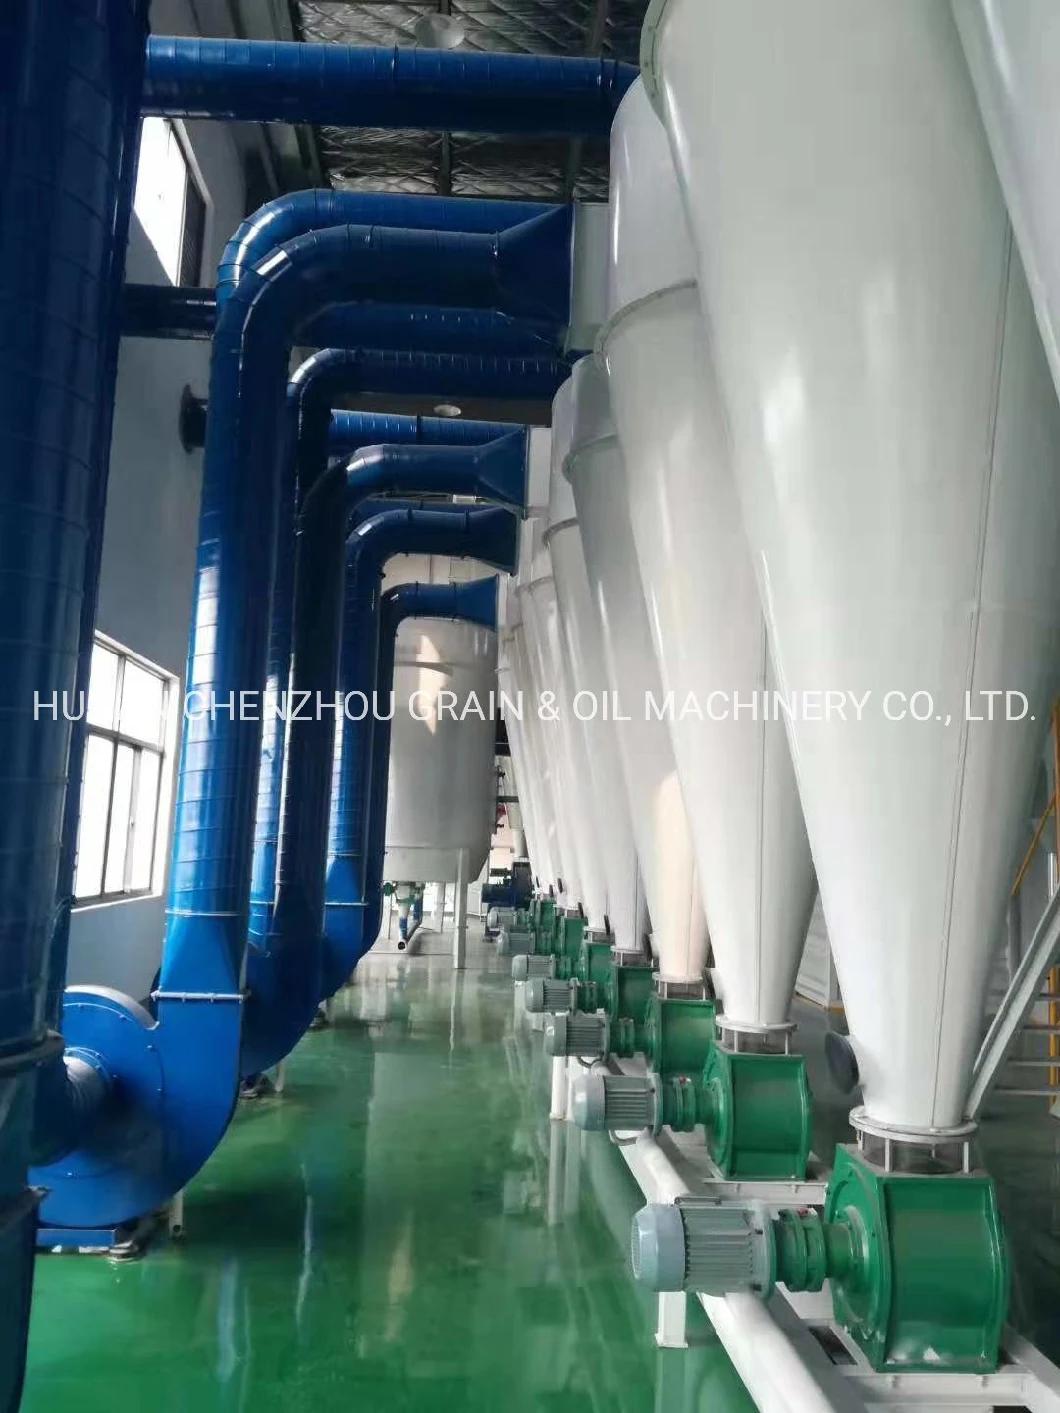 Clj Manufacturer Yellow Rice Processing Machine Professional Auto Rice Mill /Maize Mill/Millet Mill Machine